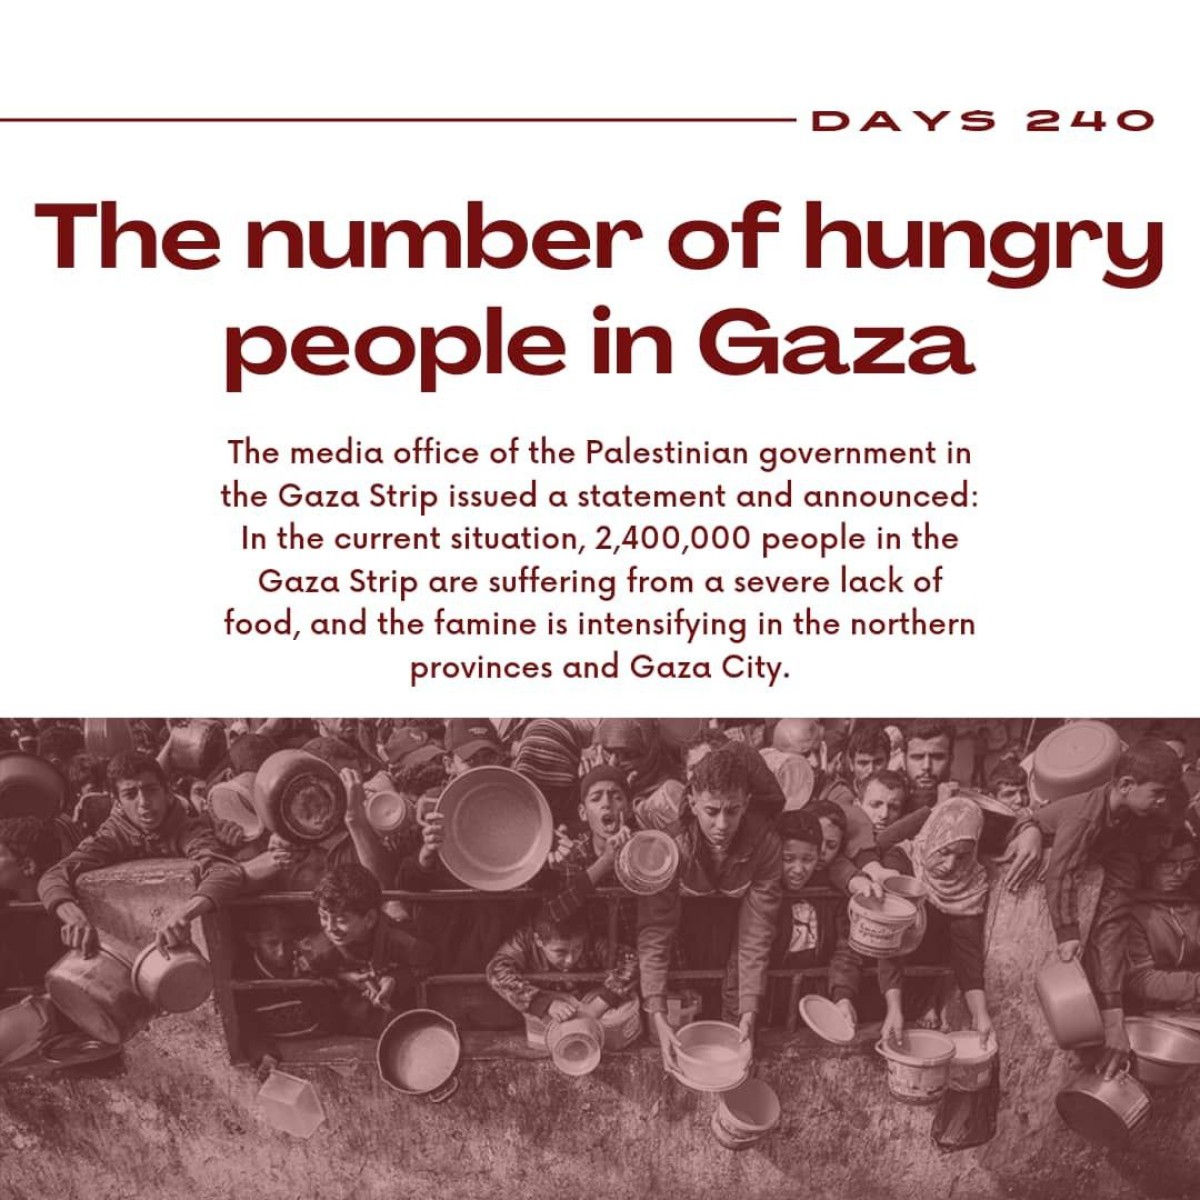 The number of hungry people in Gaza